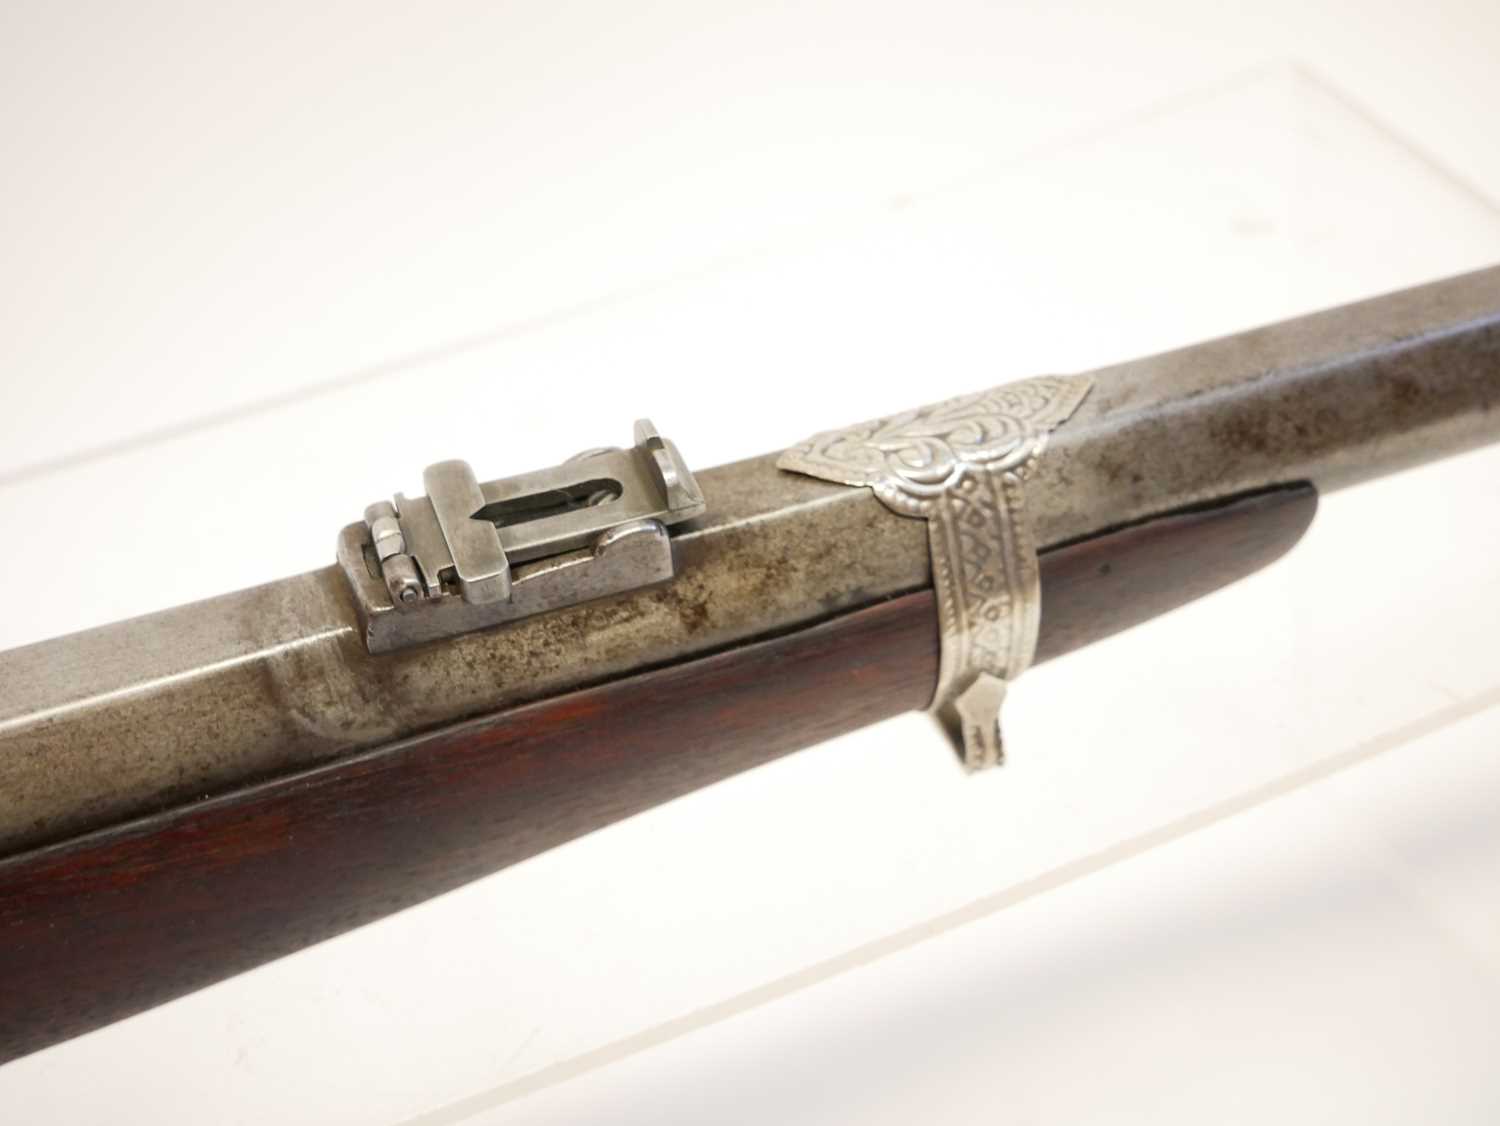 Sporterised Martini Henry .577/450 rifle, probably of Belgian origin reworked in India, 27inch - Image 6 of 13